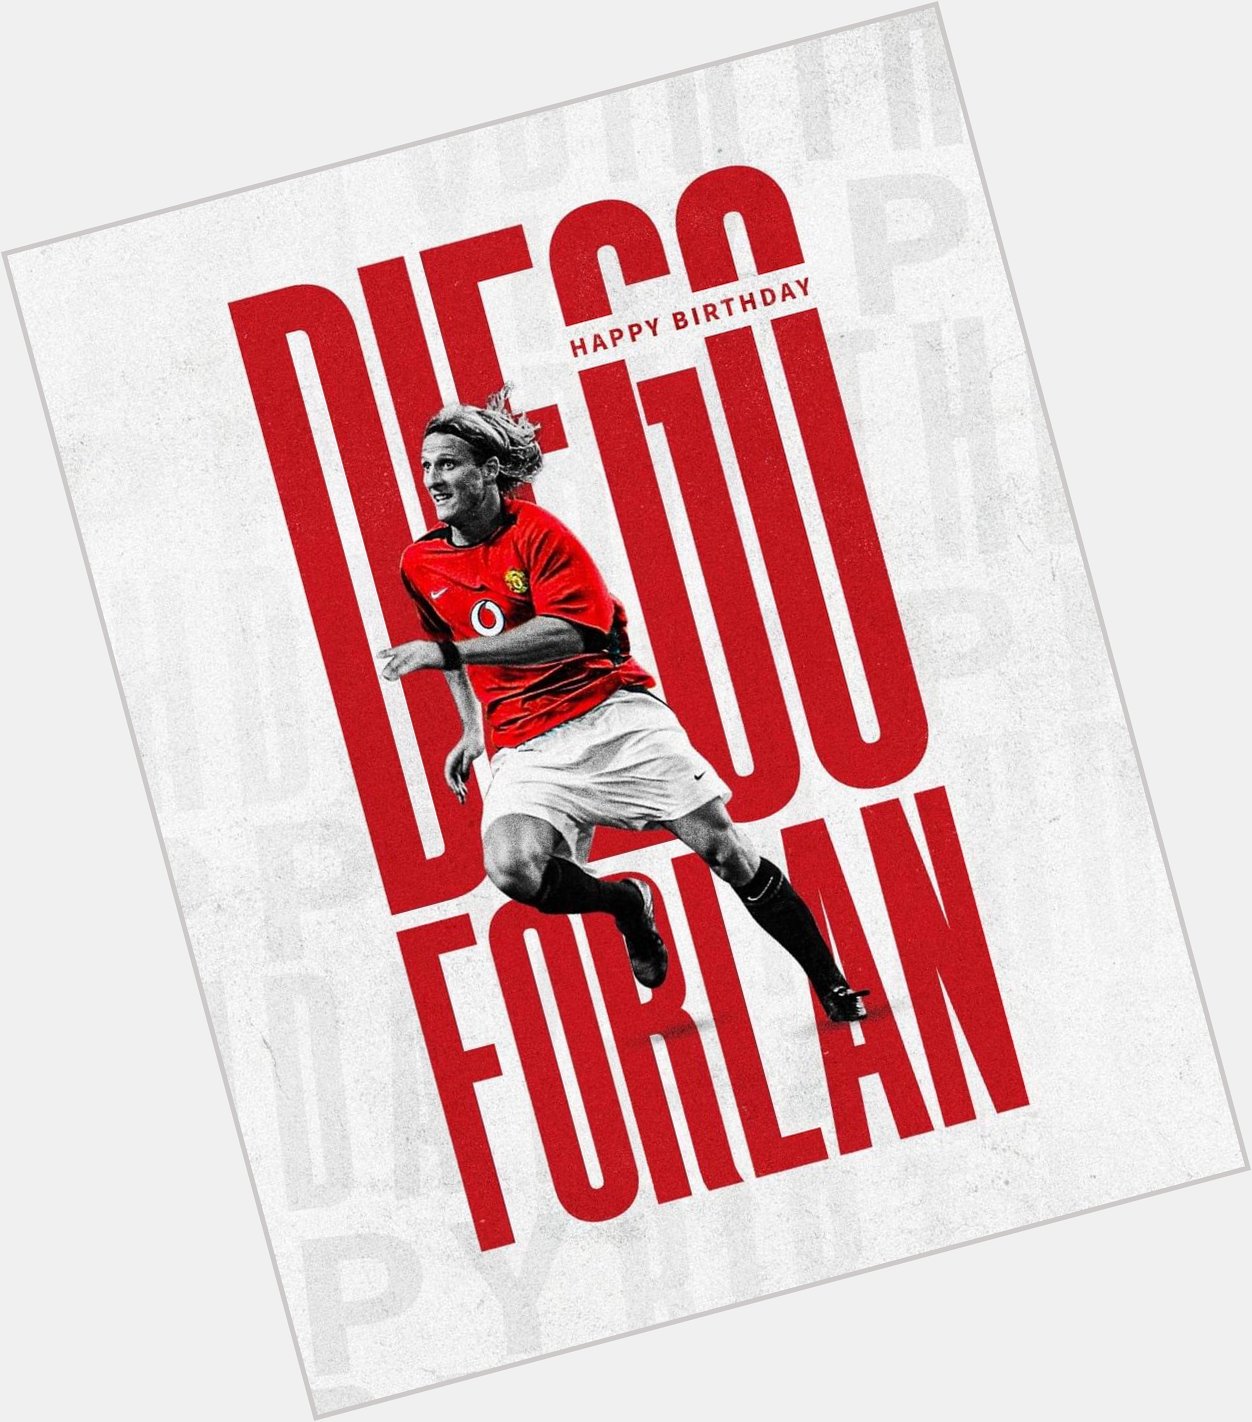 Manchester United !!

Join us in wishing Diego Forlan a happy birthday! 